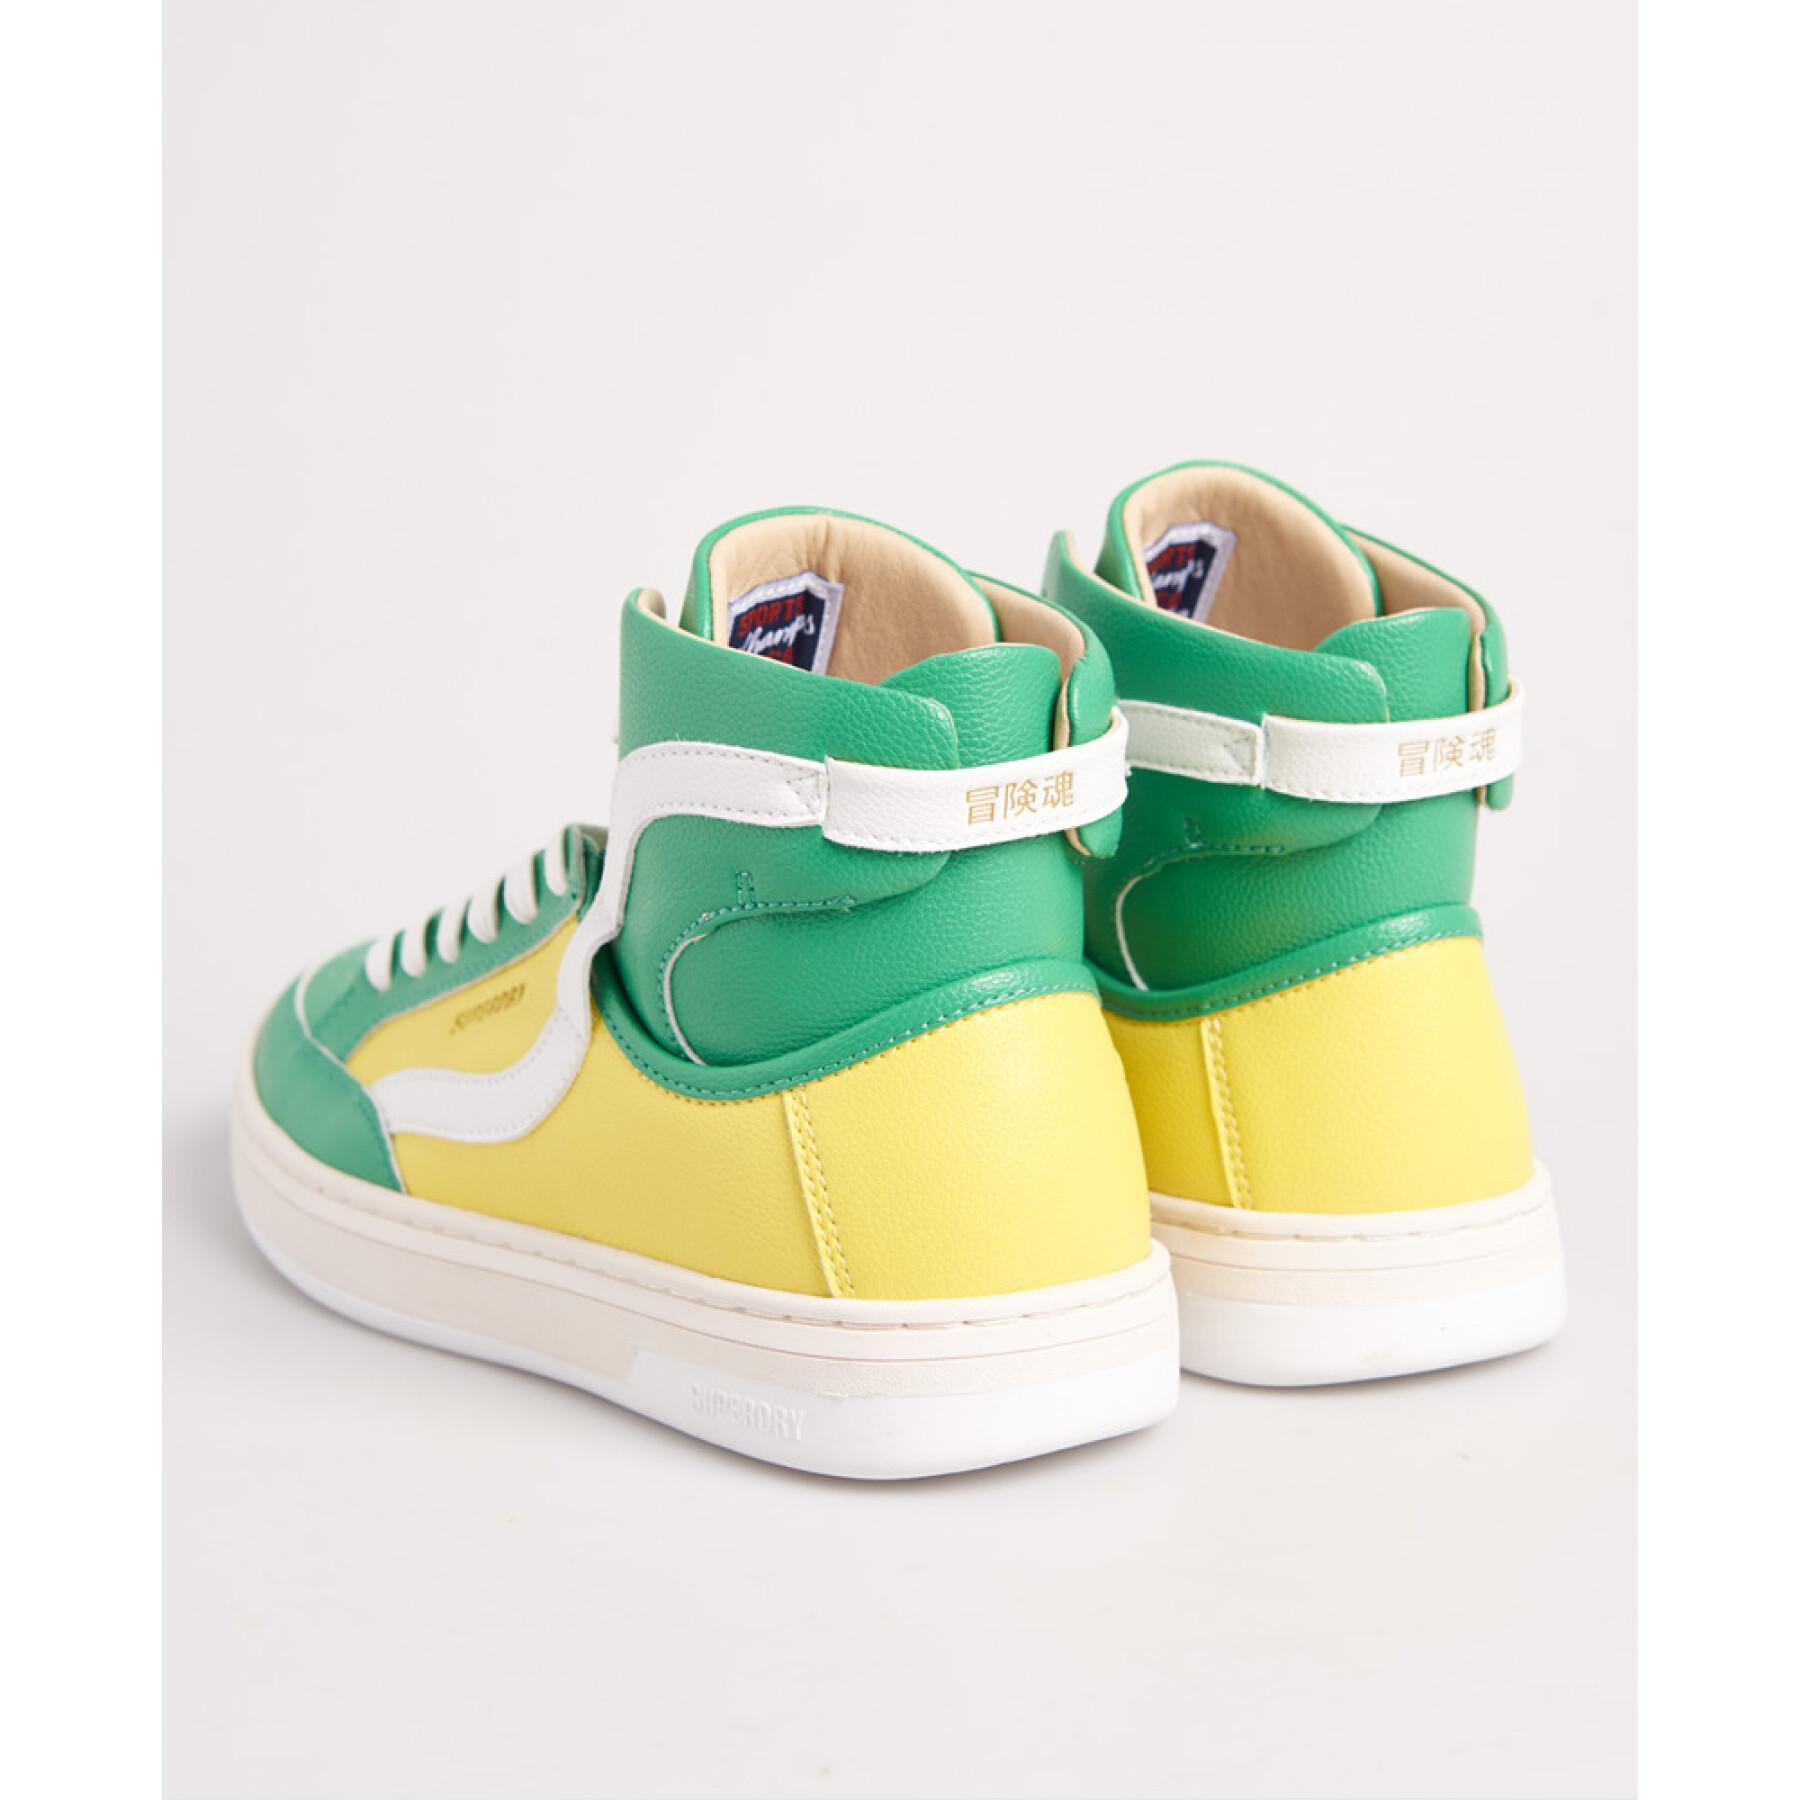 Women's sneakers Superdry Lux véganes